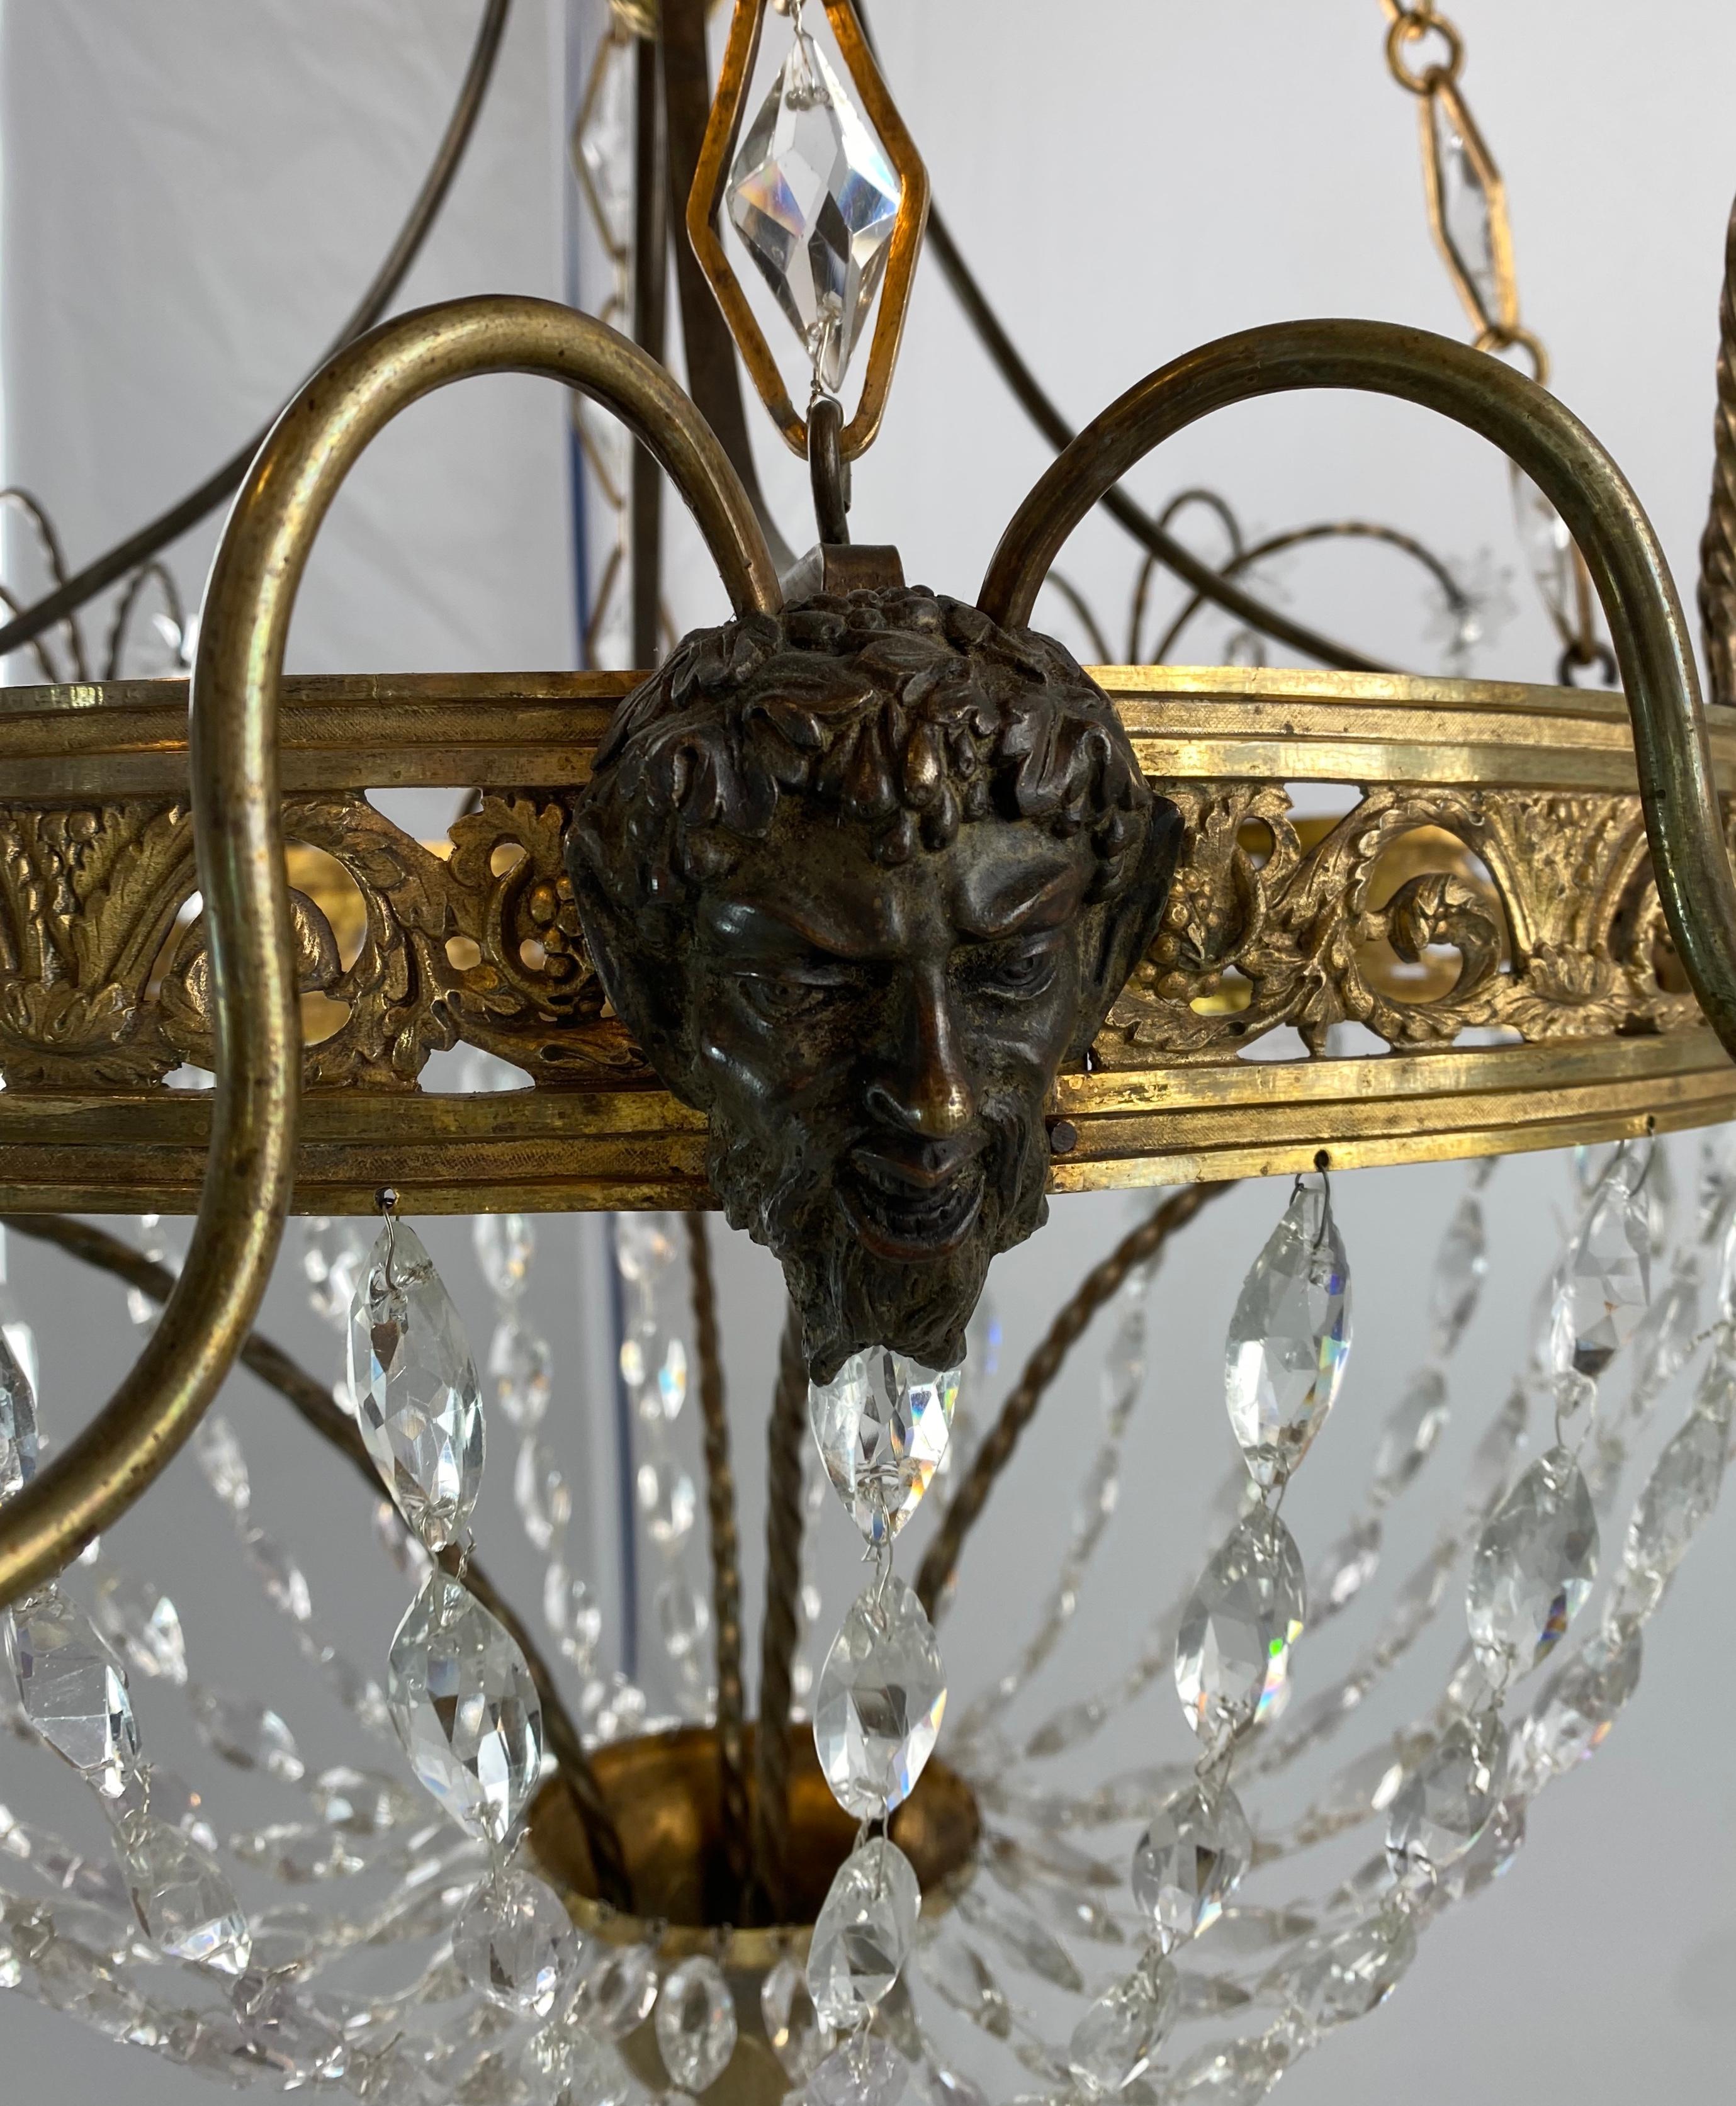 19th Century Russian Empire Chandelier, Early 19th C